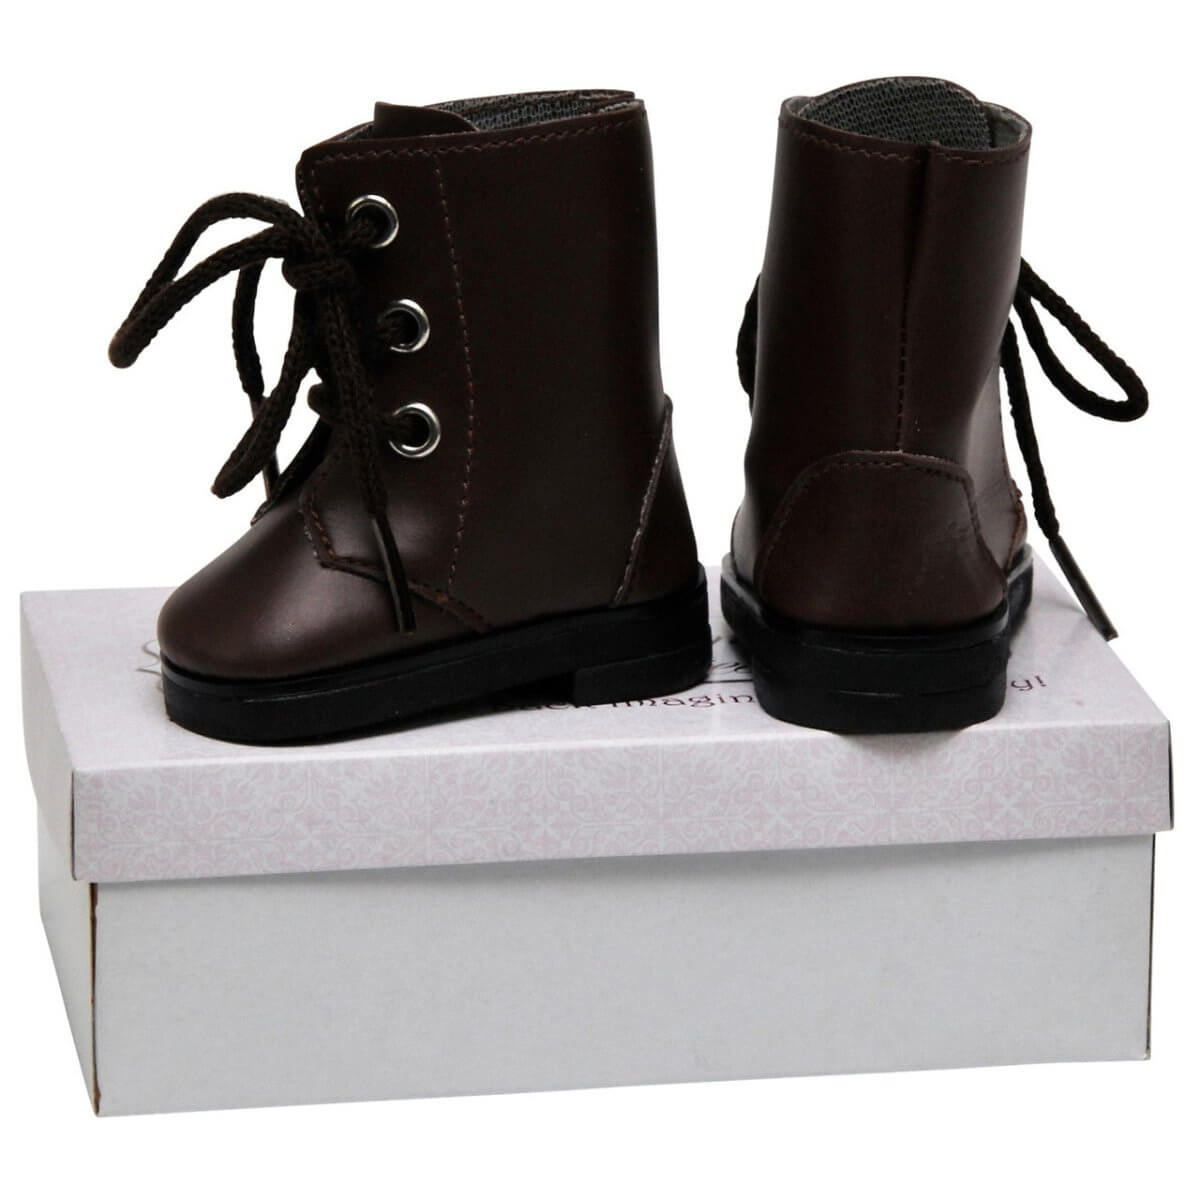 Queen's Treasures Brown Lace Up Boots and Shoe Box for 18" Dolls - Simon's Collectibles